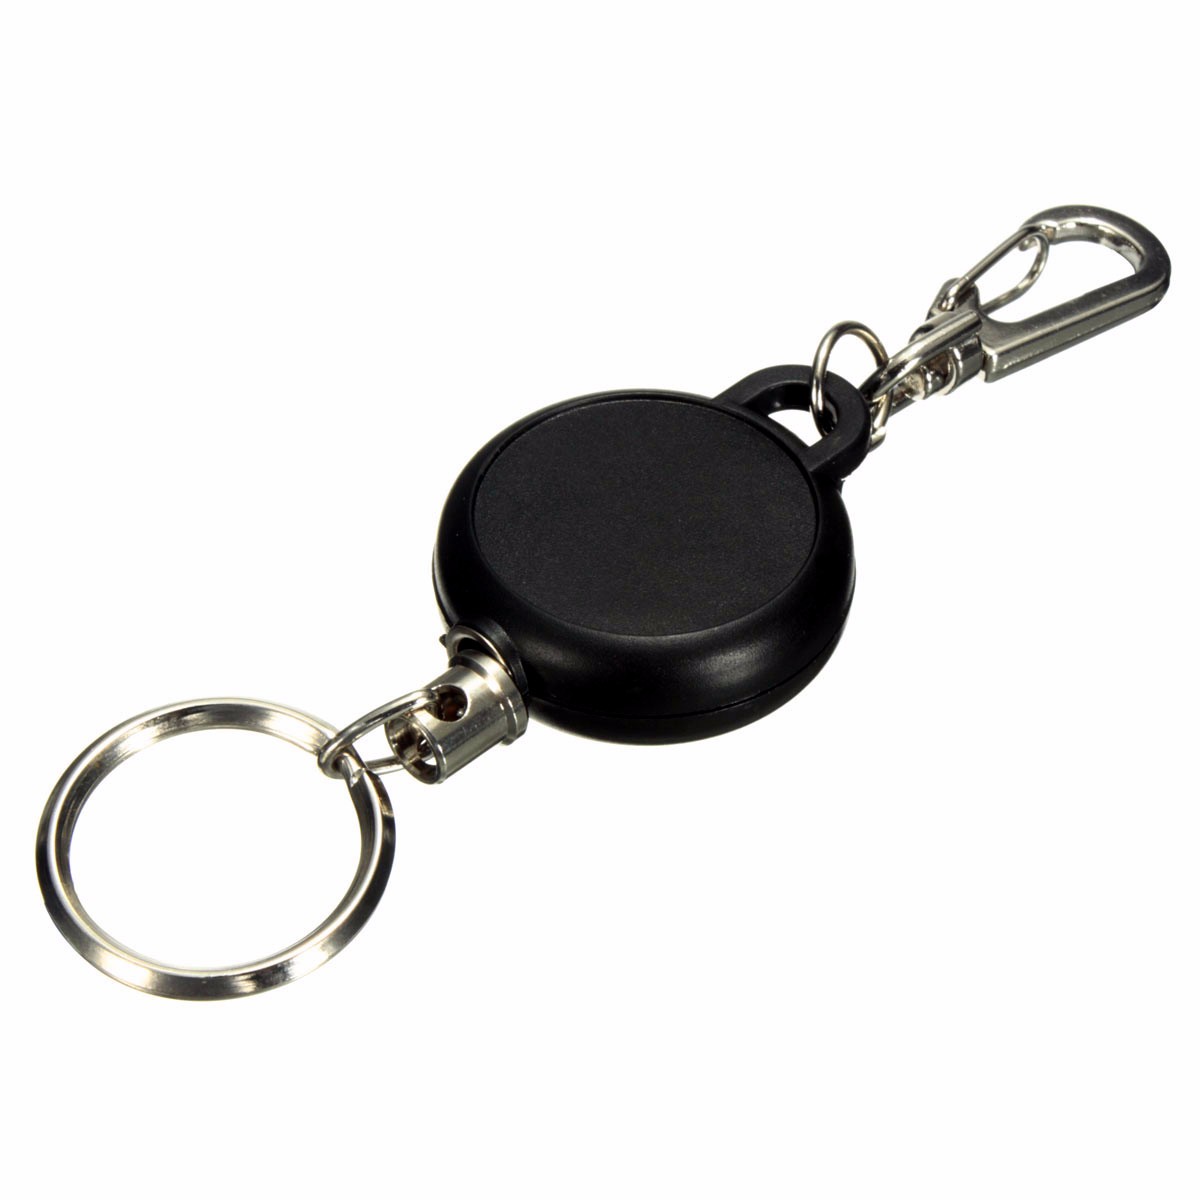 Key-Chain-Stainless-Steel-Cord-Holder-Keyring-Reel-Retractable-Recoil-Belt-Clip-Key-Clip-1291644